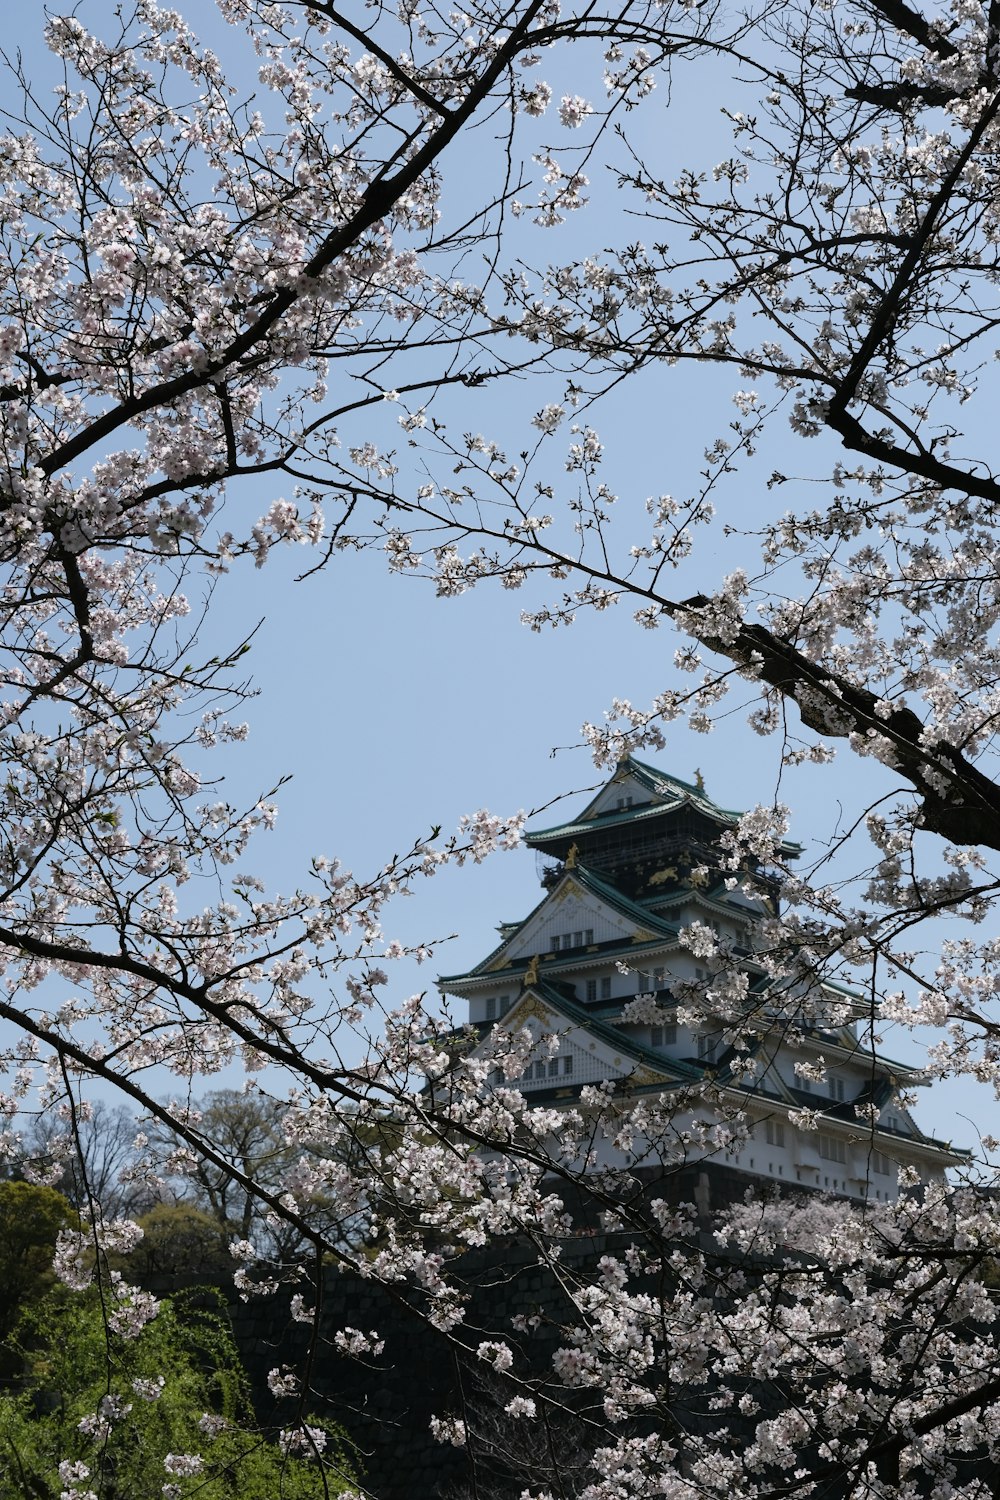 a tall building with a tower surrounded by cherry blossoms